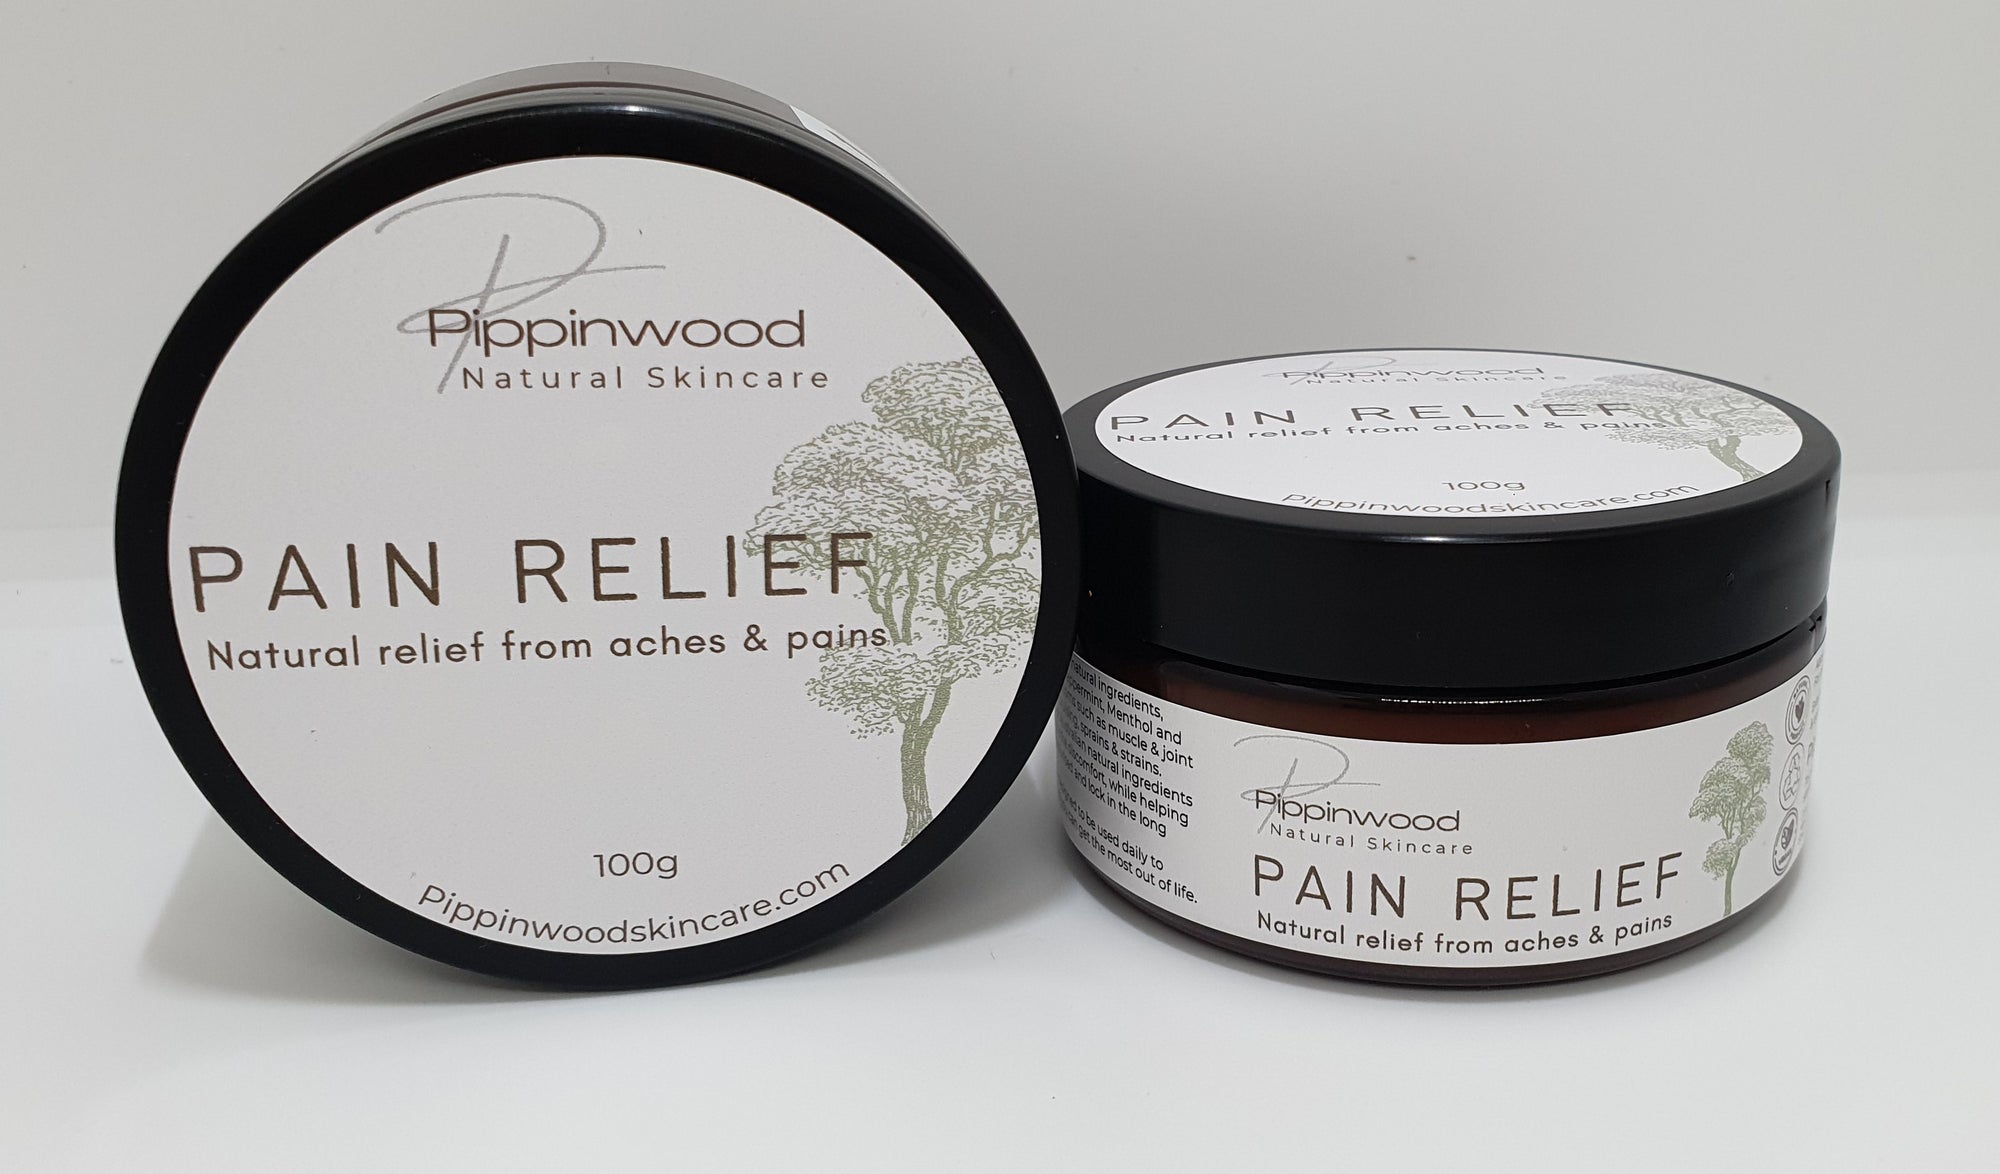 Pippinwood Natural Skincare Pain Relief